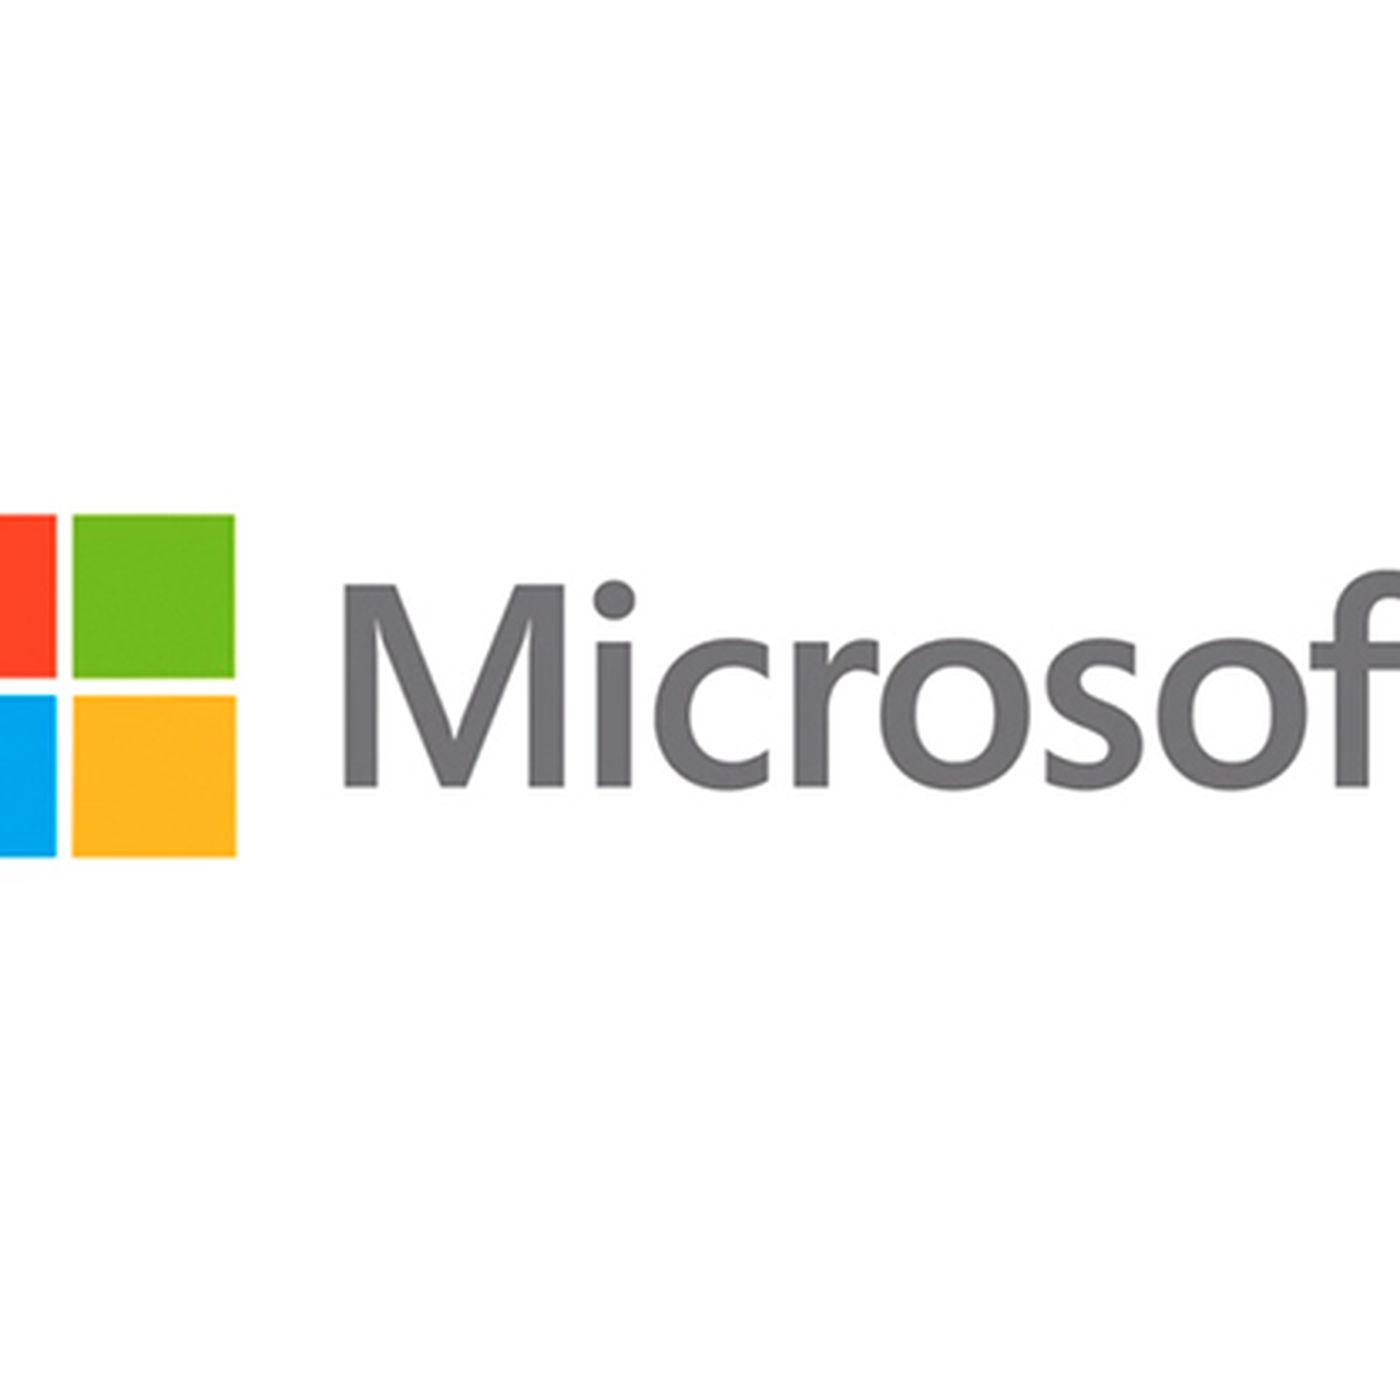 Official Microsoft Surface Logo - Microsoft unveils its new logo, the first major change in 25 years ...